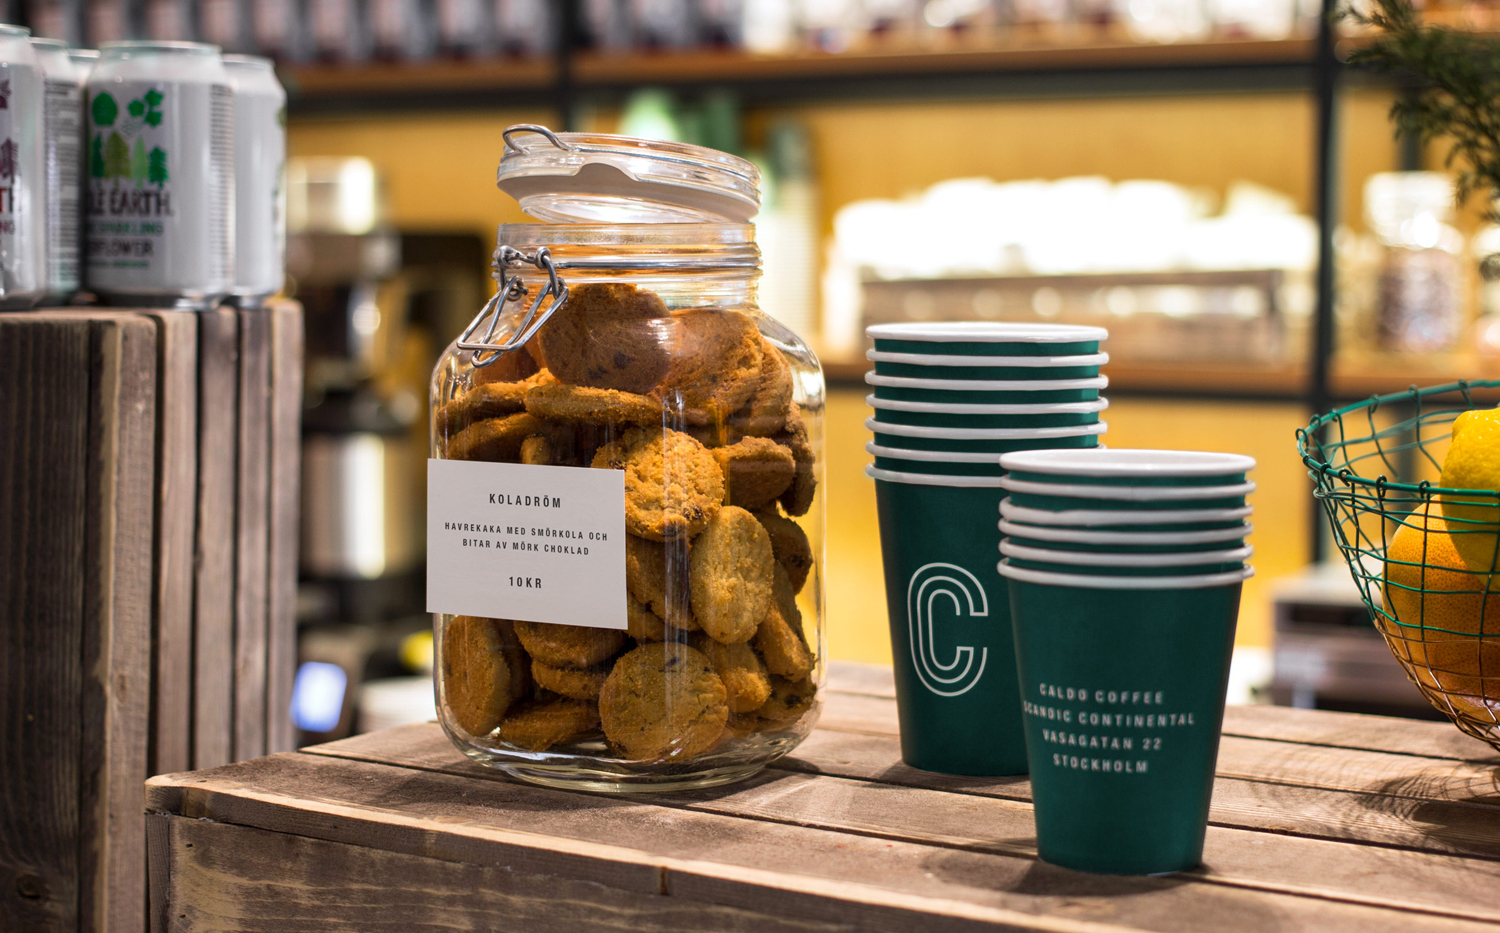 Branded coffee cups and price tags designed by 25ah for Stockholm cafe Caldo Coffee at the Scandic Continental